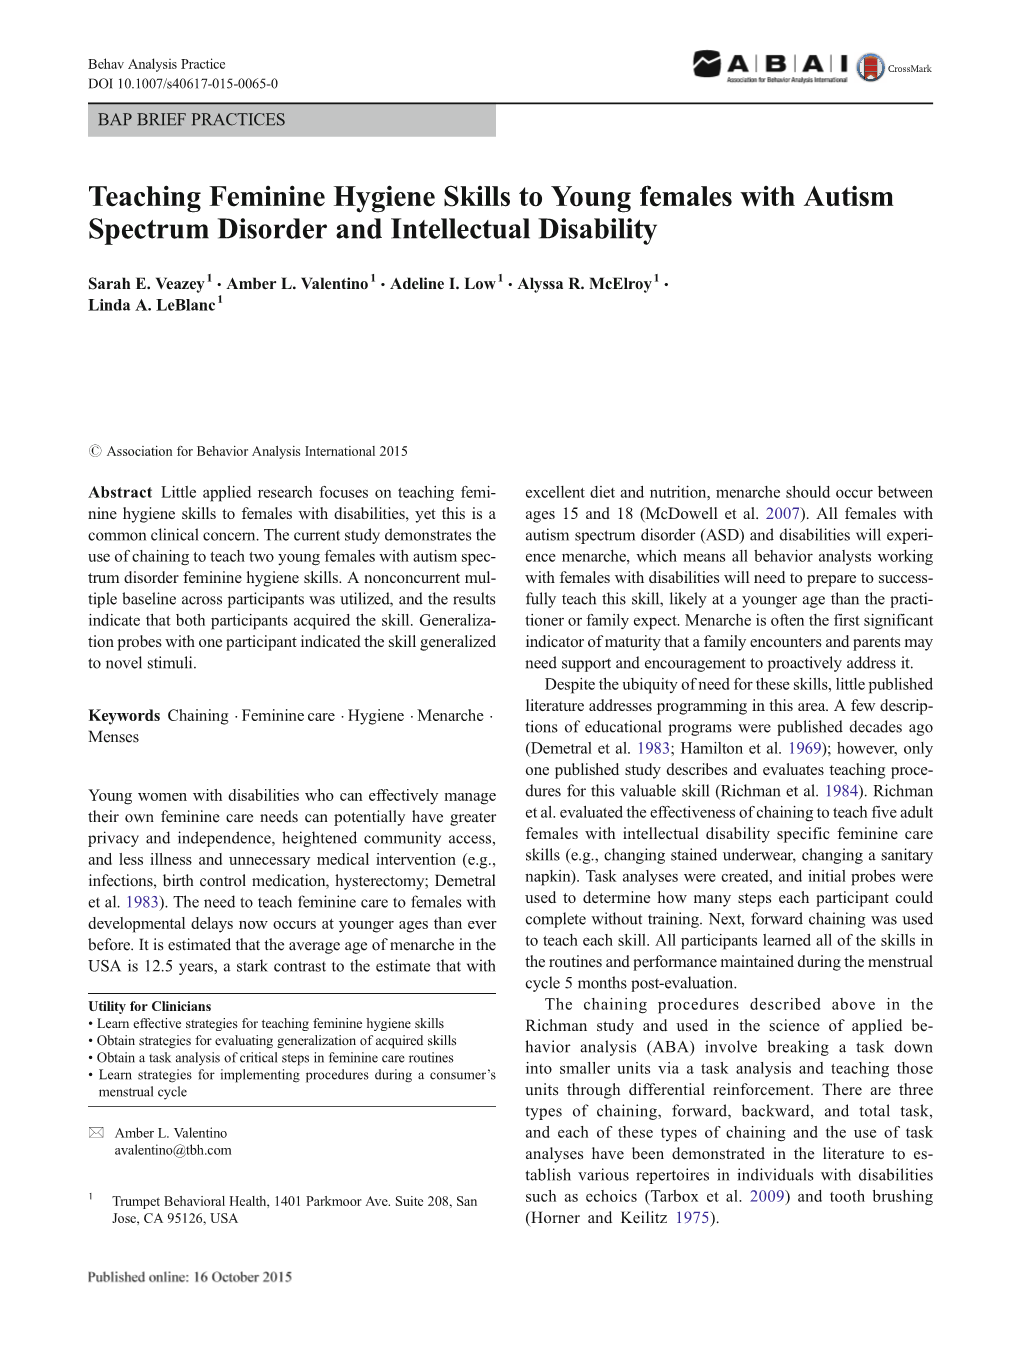 Teaching Feminine Hygiene Skills to Young Females with Autism Spectrum Disorder and Intellectual Disability